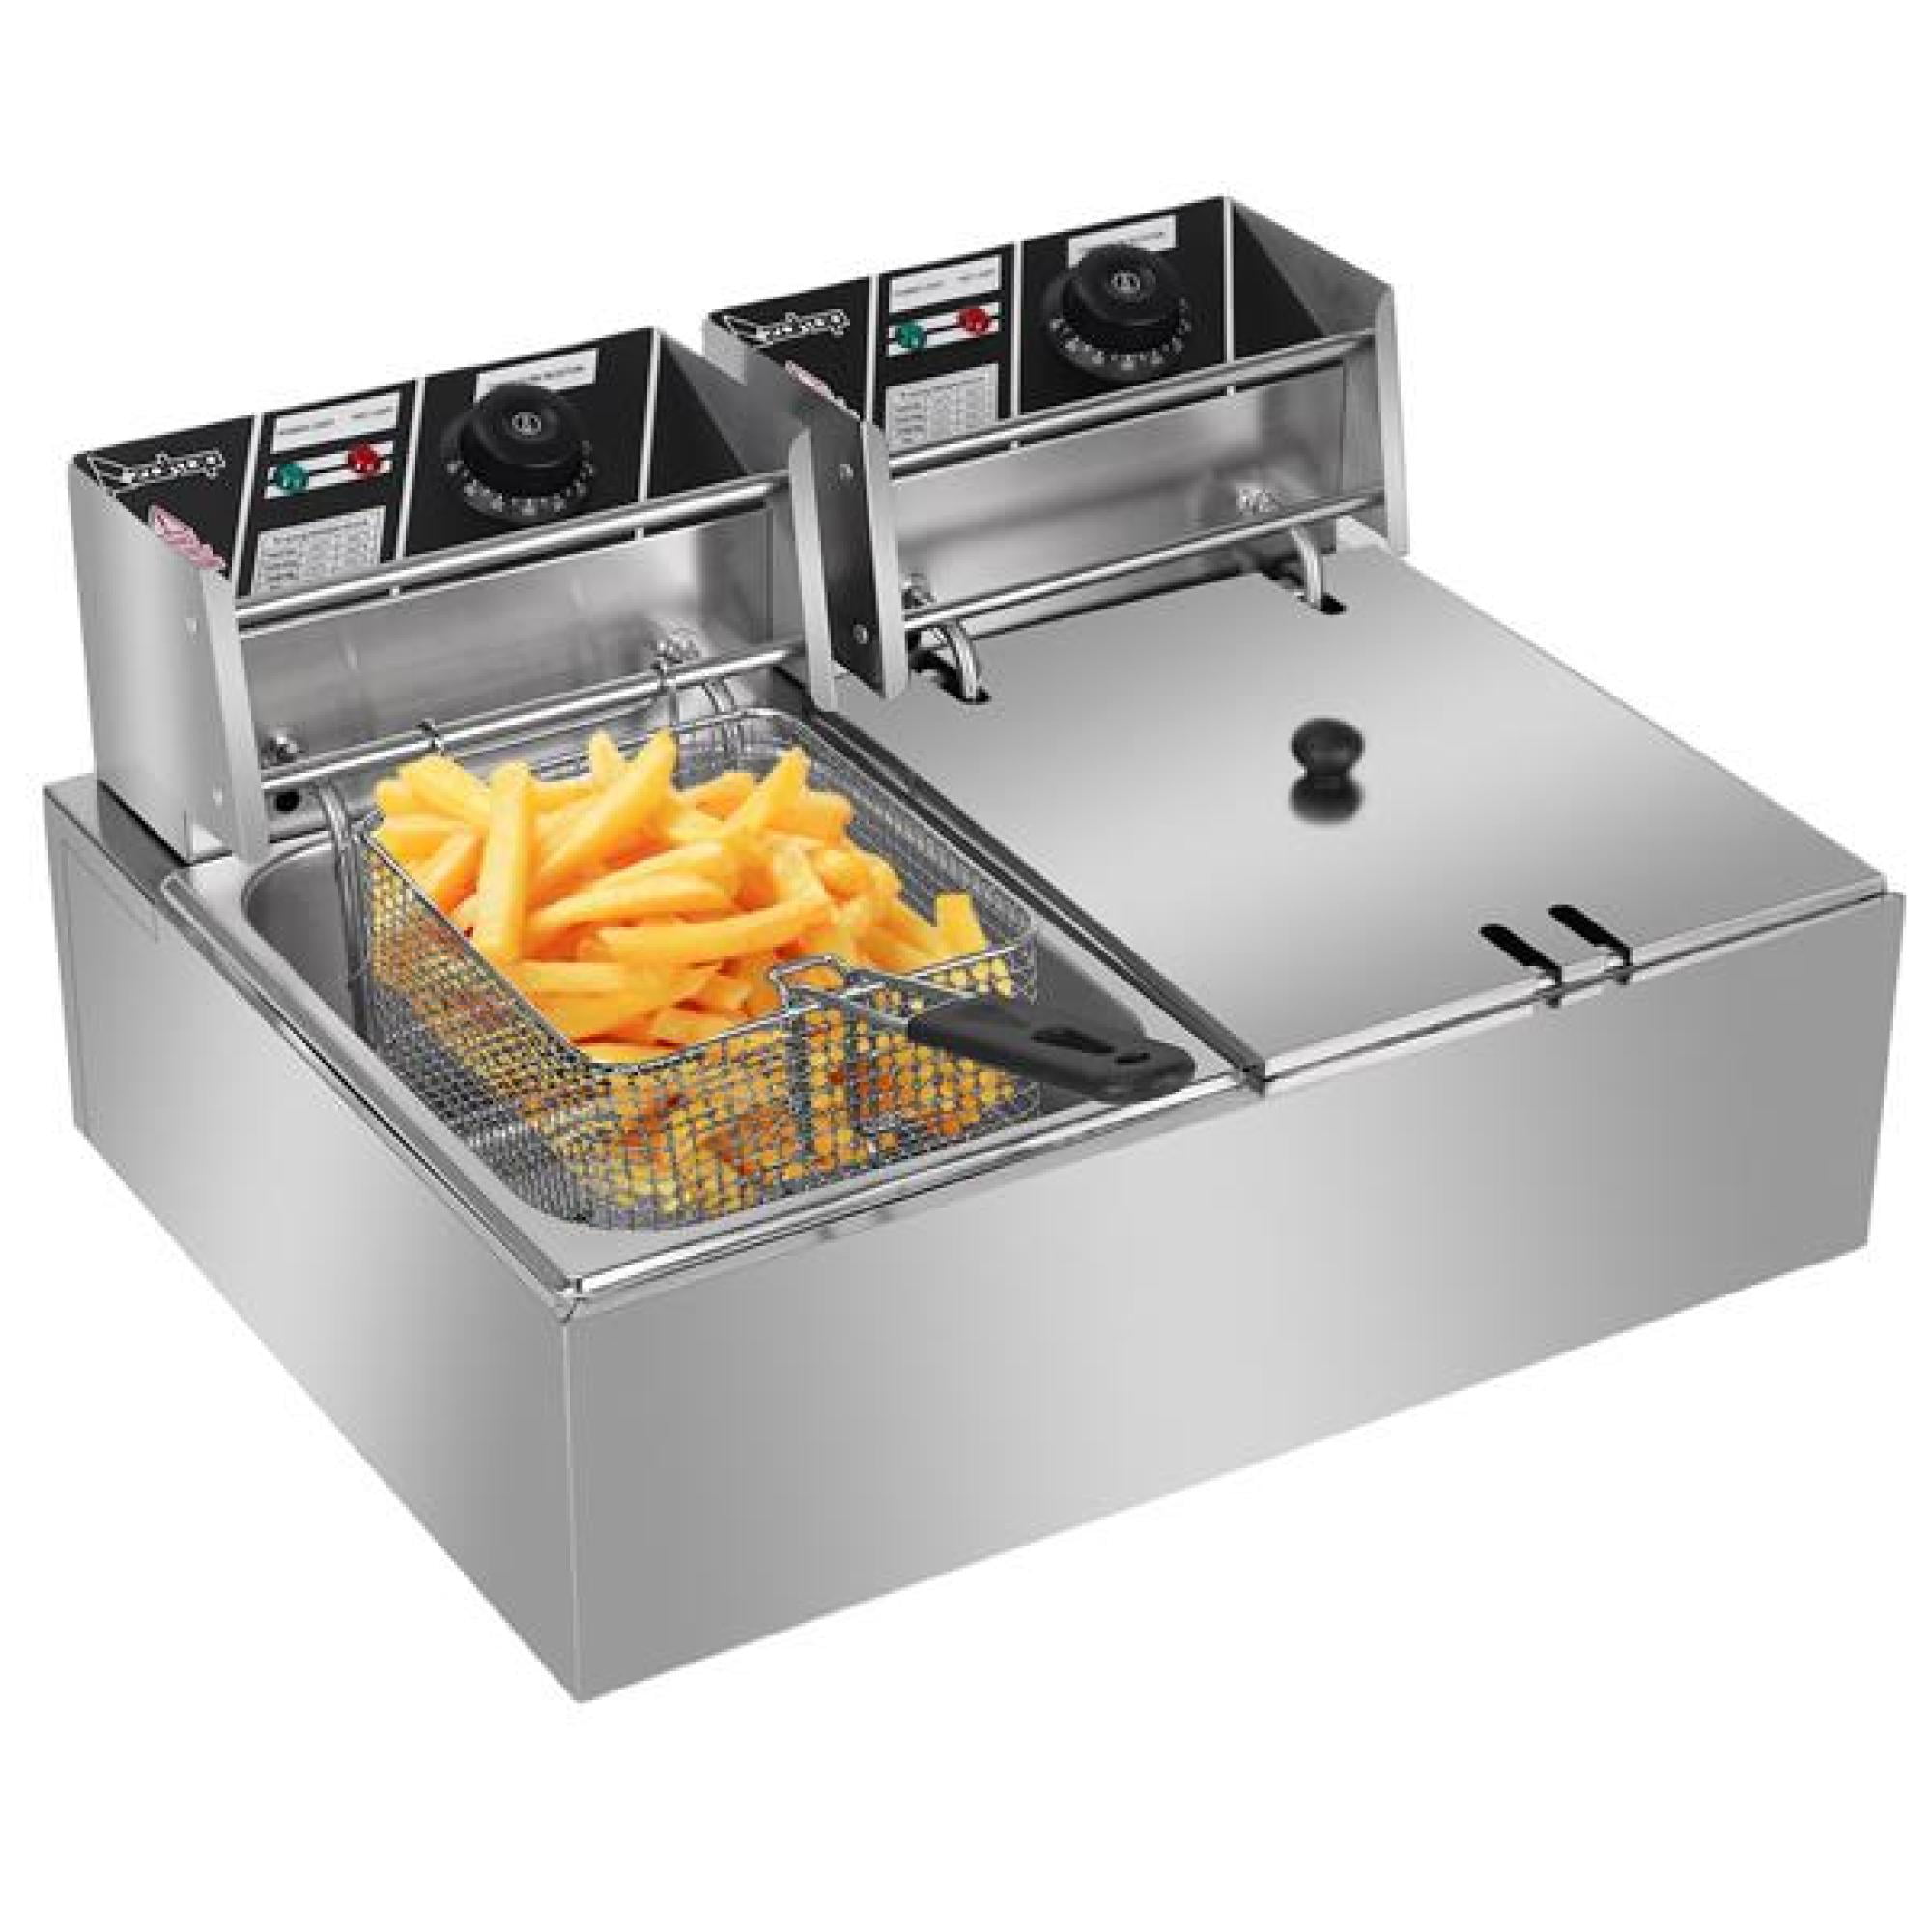 Countertop Electric Deep Fryer Dual Tank Stainless Steel Commercial Restaurant 